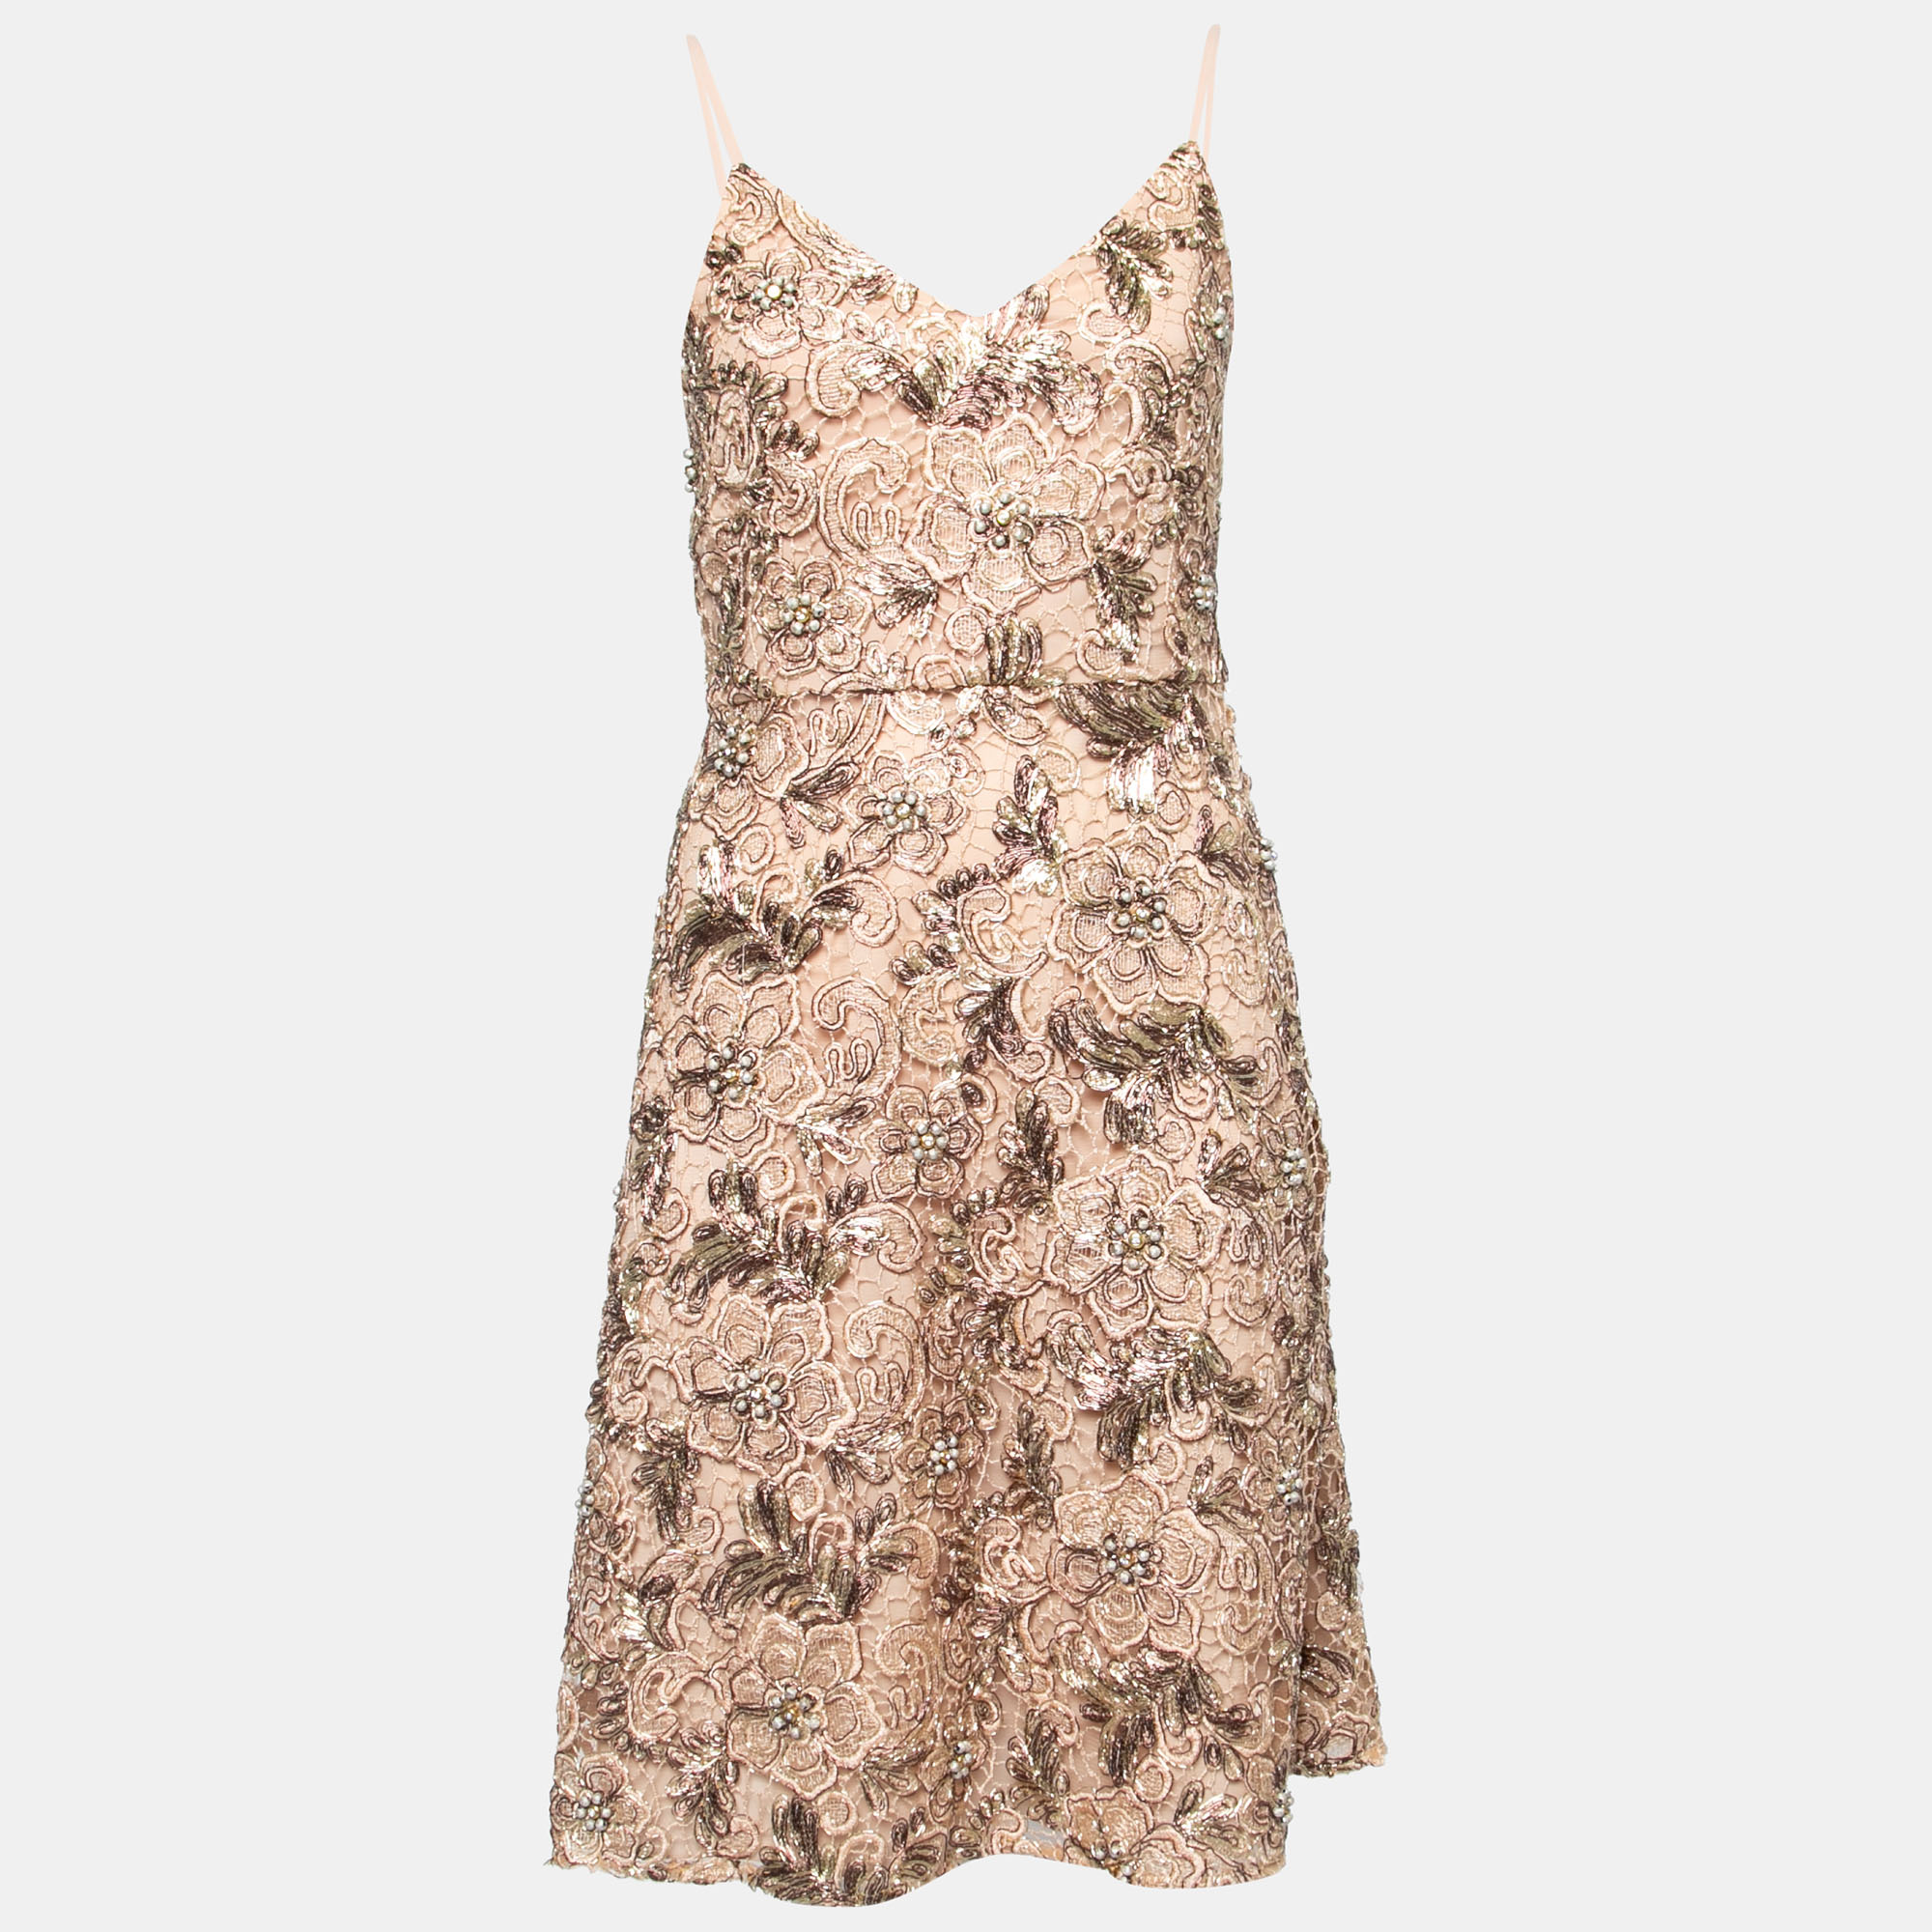 Mikael aghal gold embellished lace cocktail dress s